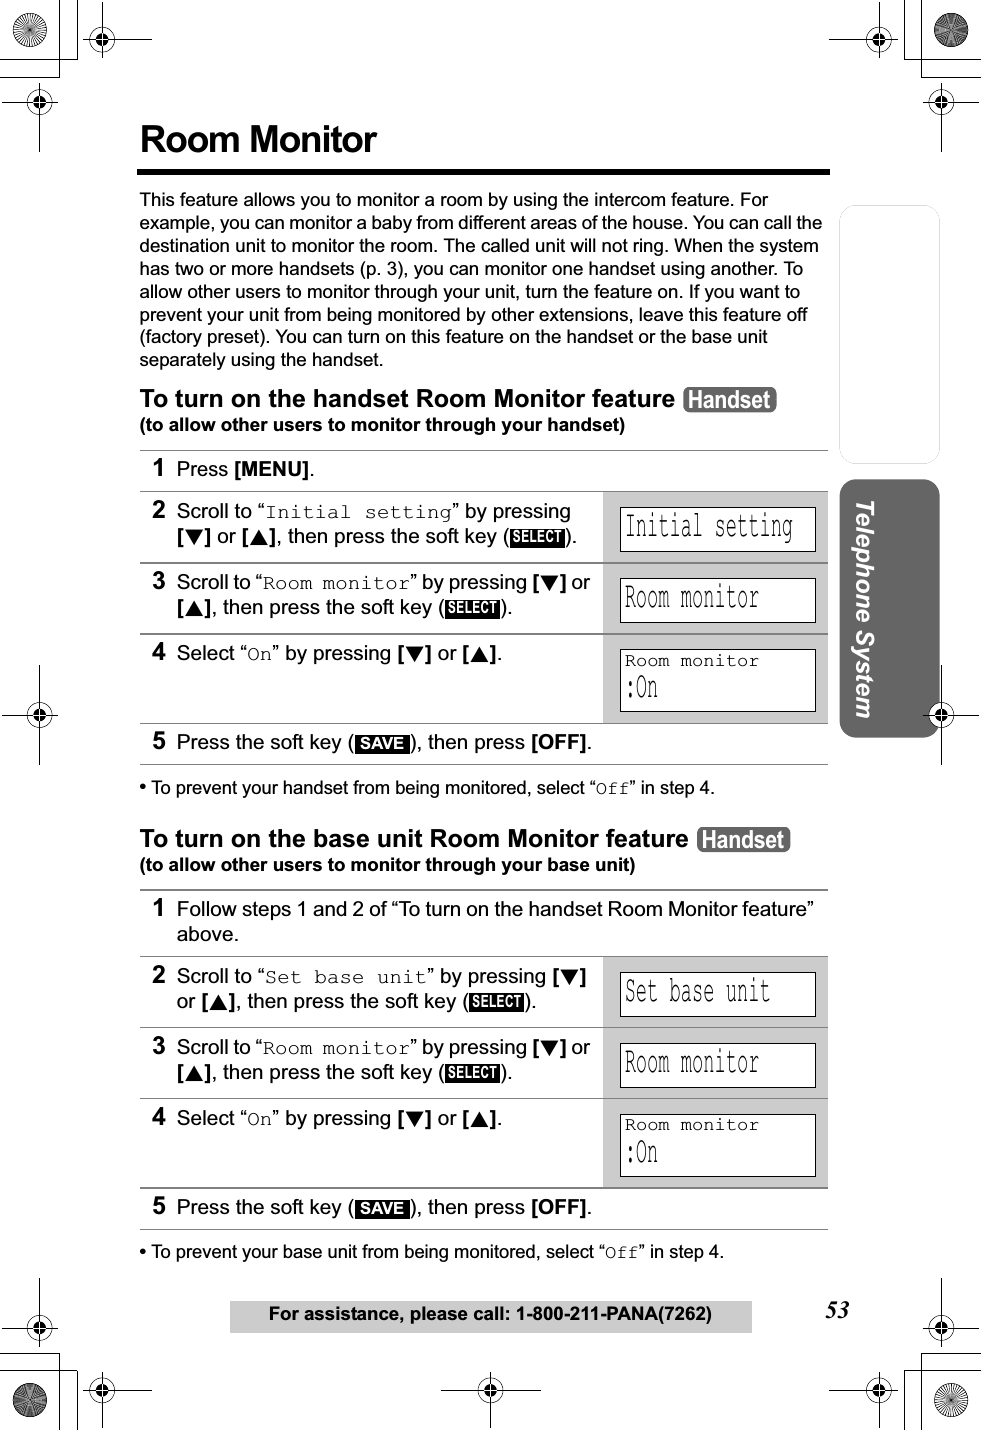 Useful InformationAnswering SystemPreparation53For assistance, please call: 1-800-211-PANA(7262)Telephone SystemRoom MonitorThis feature allows you to monitor a room by using the intercom feature. For example, you can monitor a baby from different areas of the house. You can call the destination unit to monitor the room. The called unit will not ring. When the system has two or more handsets (p. 3), you can monitor one handset using another. To allow other users to monitor through your unit, turn the feature on. If you want to prevent your unit from being monitored by other extensions, leave this feature off (factory preset). You can turn on this feature on the handset or the base unit separately using the handset.To turn on the handset Room Monitor feature (to allow other users to monitor through your handset)•To prevent your handset from being monitored, select “Off” in step 4.To turn on the base unit Room Monitor feature (to allow other users to monitor through your base unit)•To prevent your base unit from being monitored, select “Off” in step 4.1Press [MENU].2Scroll to “Initial setting” by pressing [d]or [B], then press the soft key ( ). 3Scroll to “Room monitor” by pressing [d]or [B], then press the soft key ( ). 4Select “On” by pressing [d]or [B].5Press the soft key ( ), then press [OFF].1Follow steps 1 and 2 of “To turn on the handset Room Monitor feature” above.2Scroll to “Set base unit” by pressing [d]or [B], then press the soft key ( ). 3Scroll to “Room monitor” by pressing [d]or [B], then press the soft key ( ).4Select “On” by pressing [d]or [B].5Press the soft key ( ), then press [OFF].HandsetSELECTInitial settingSELECTRoom monitorRoom monitor:OnSAVEHandsetSELECTSet base unitSELECTRoom monitorRoom monitor:OnSAVE